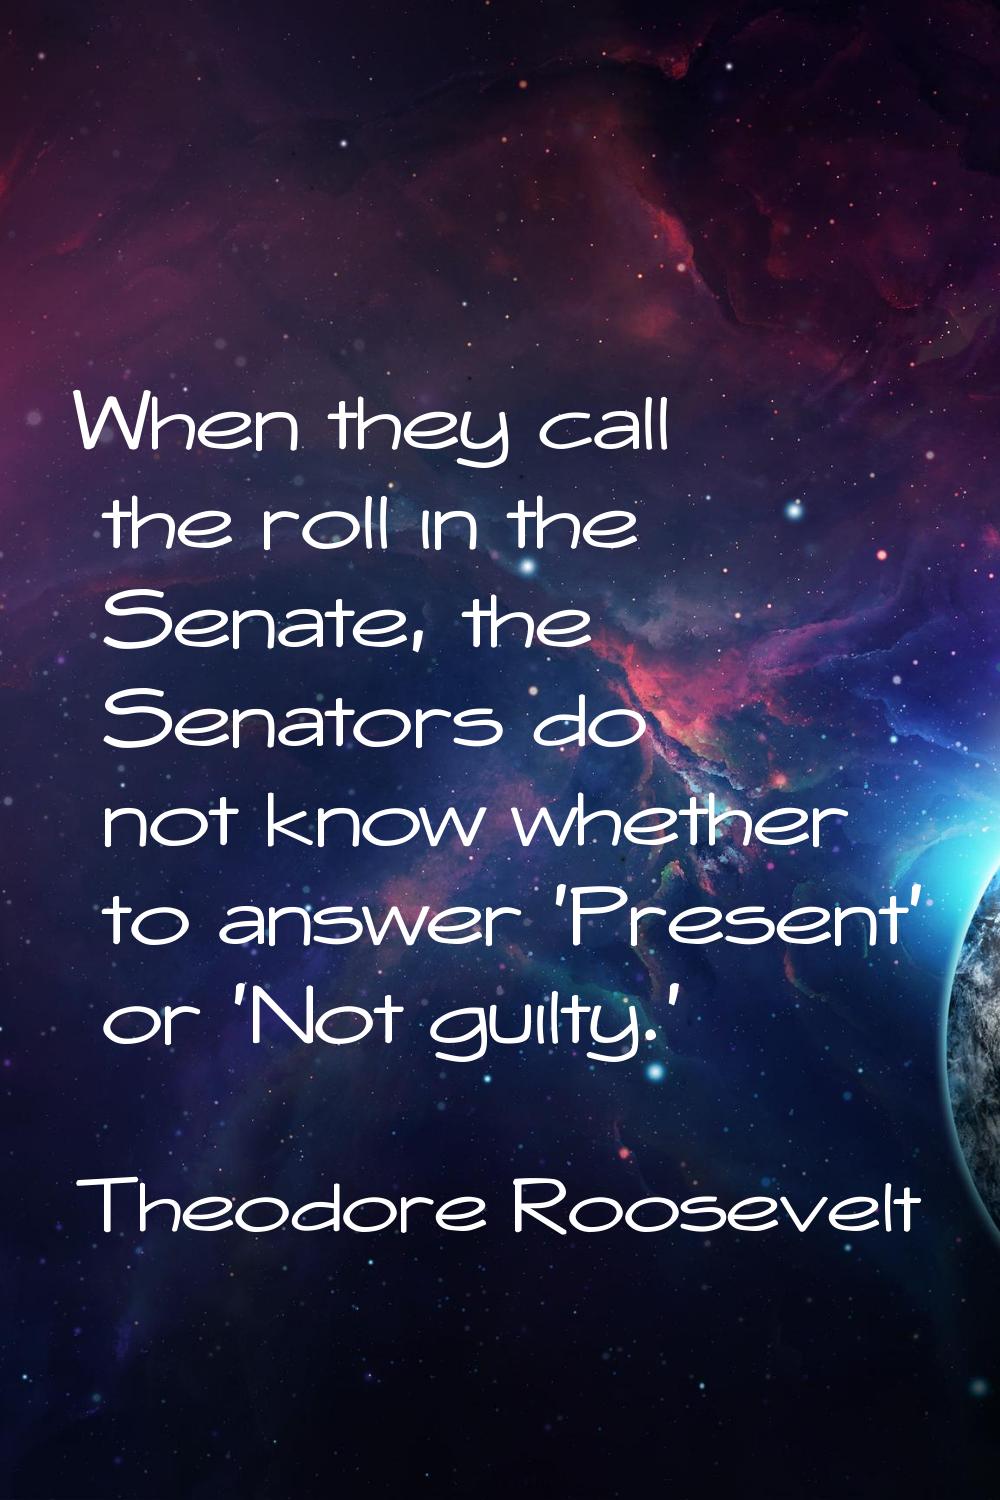 When they call the roll in the Senate, the Senators do not know whether to answer 'Present' or 'Not